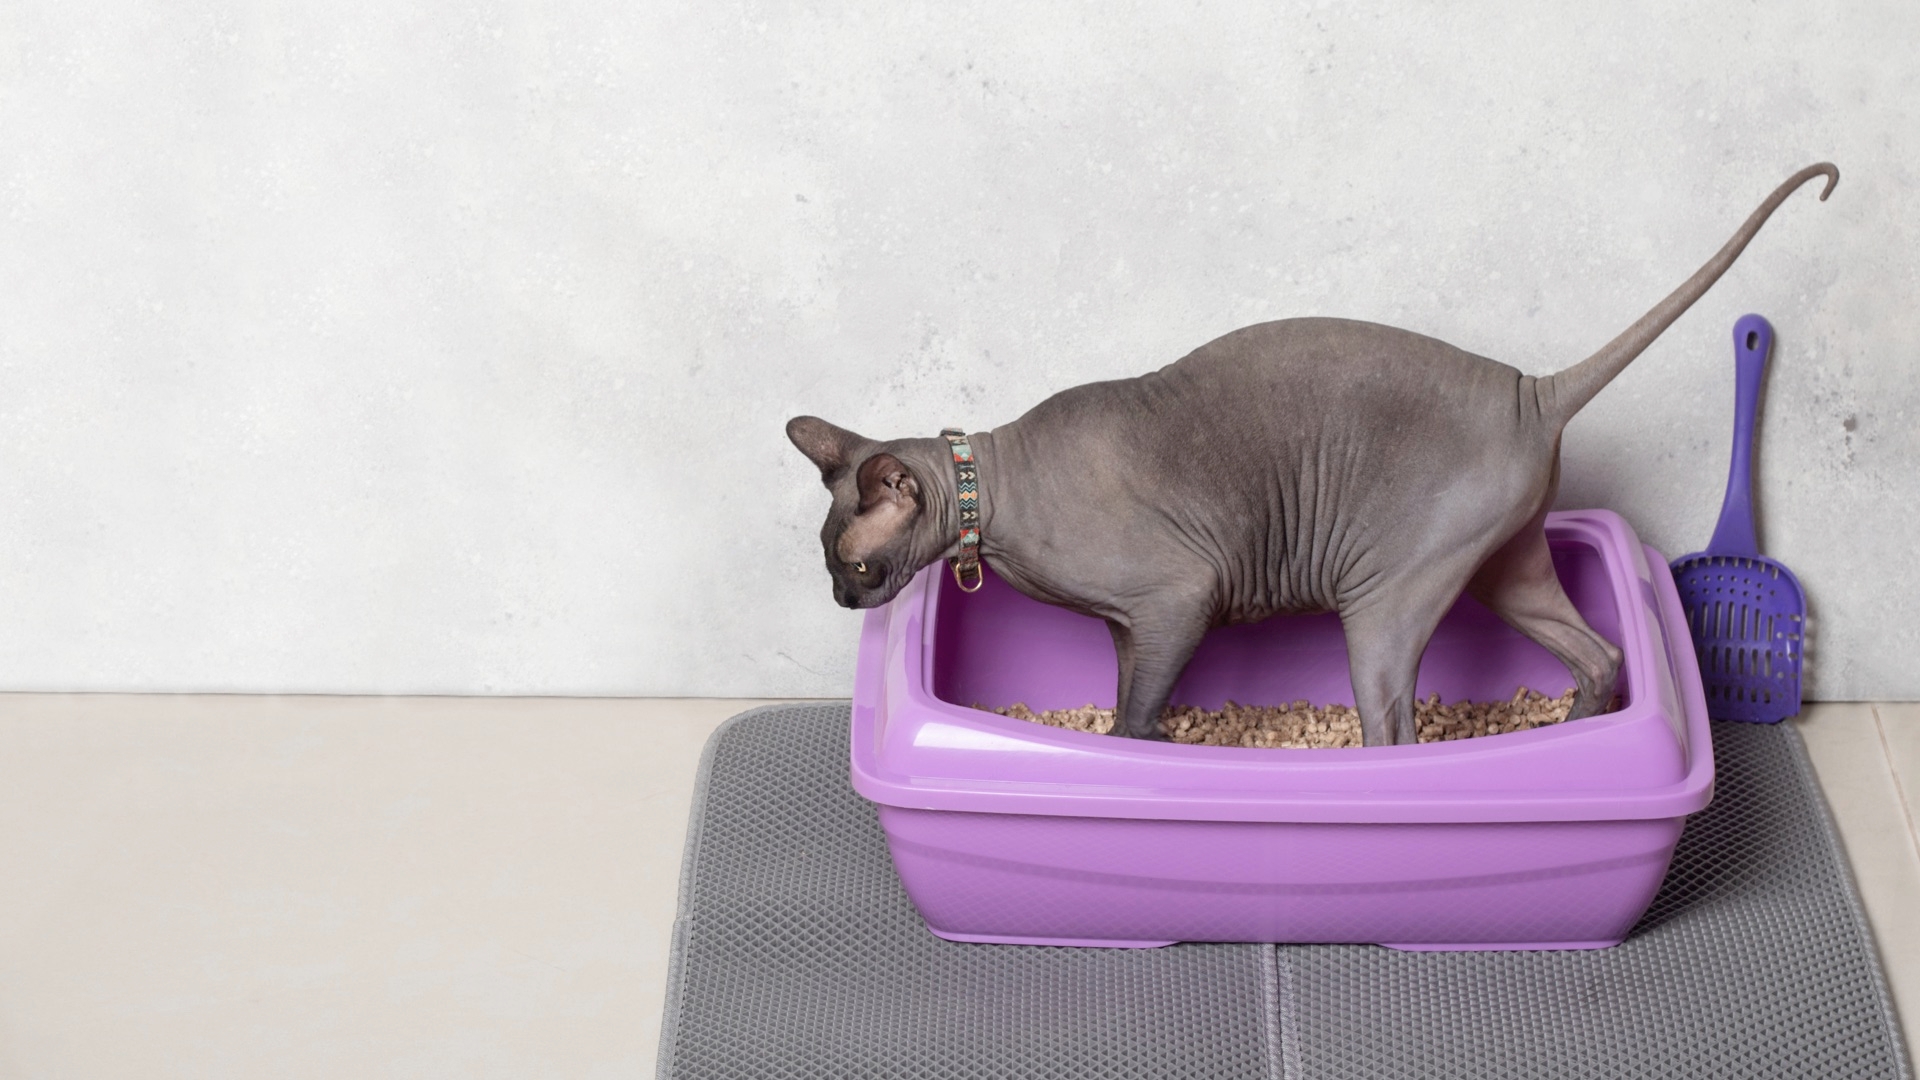 Training A Cat To Use A Litter Box